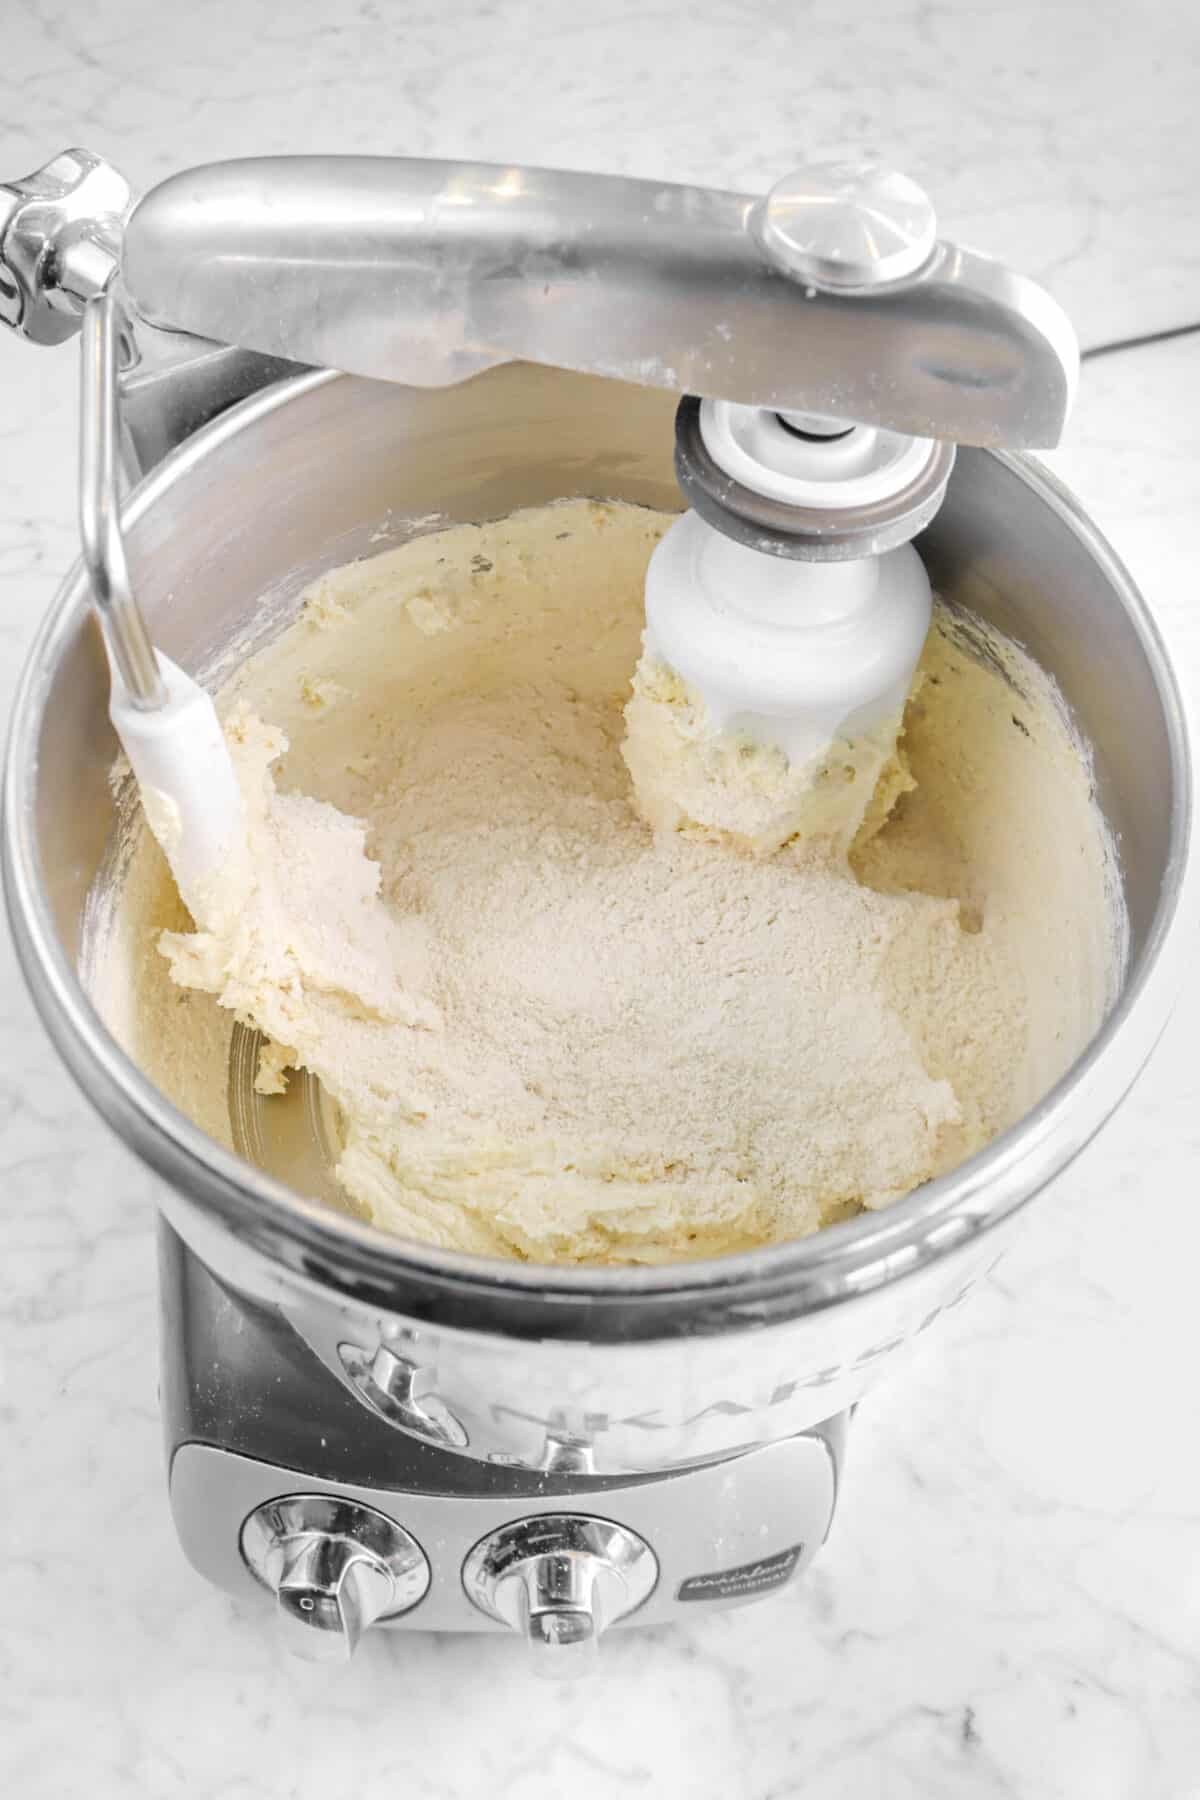 rest of flour mixture added to butter